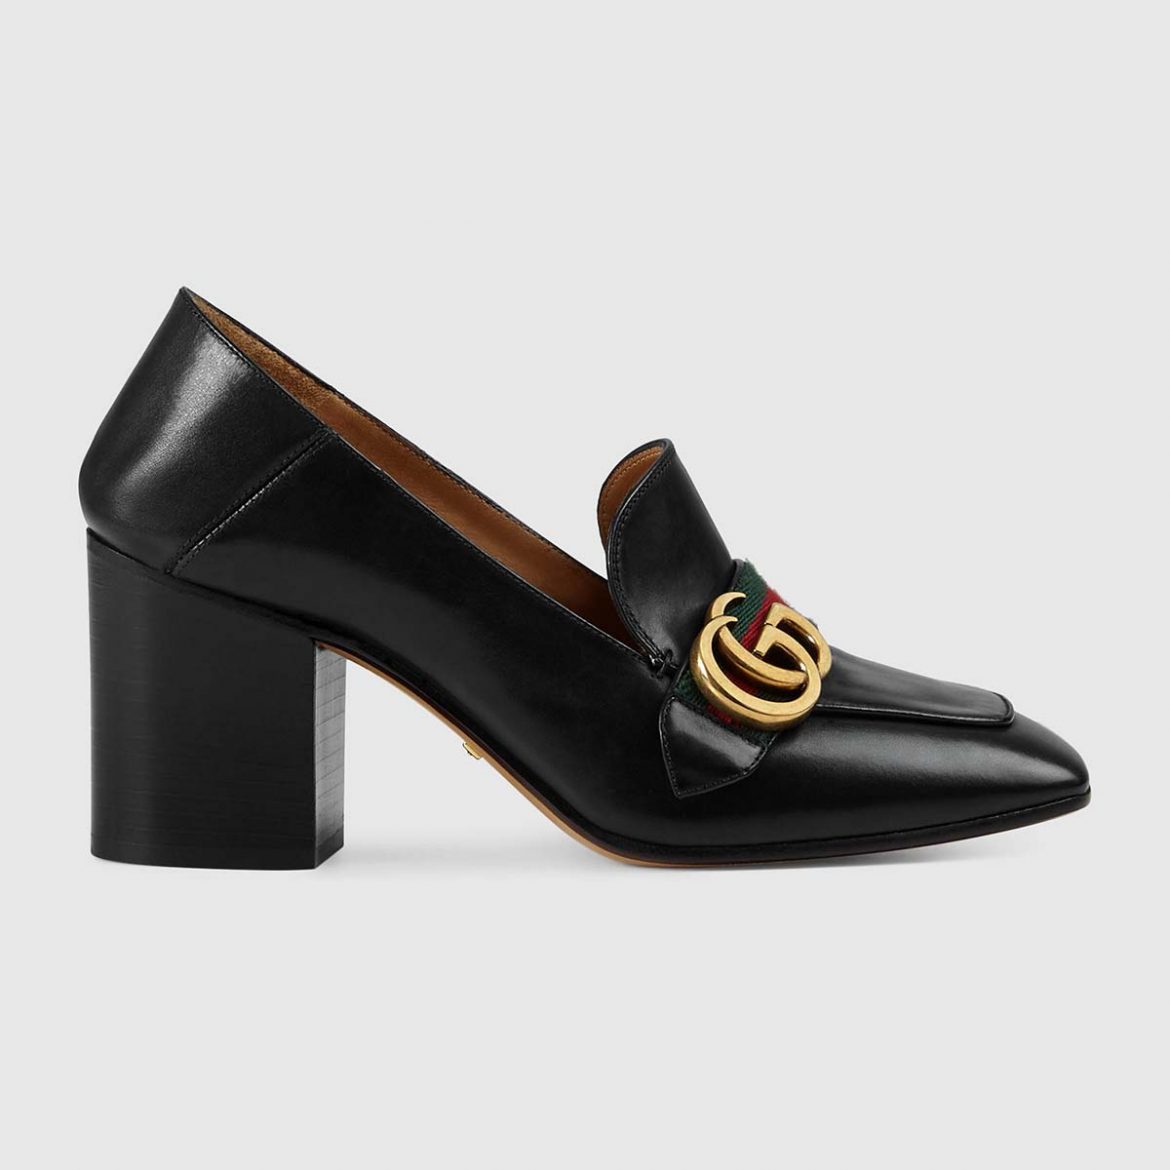 Gucci Women Leather Mid-Heel Loafer Shoes-Black - LULUX